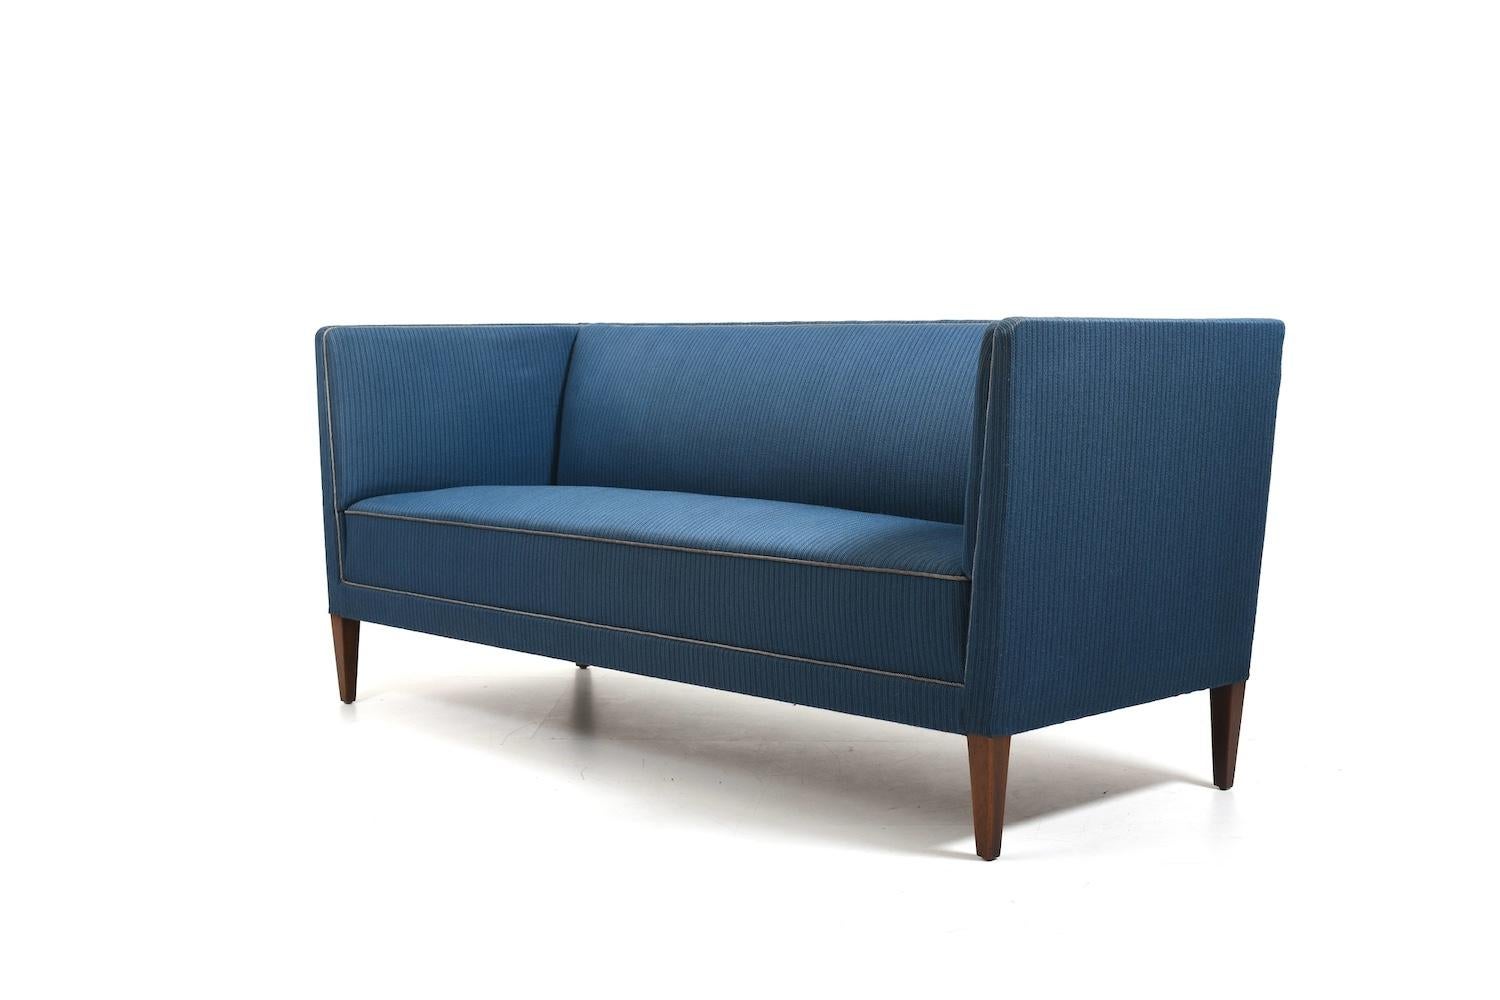 Danish Three Seat Sofa by Frits Henningsen 1930s. Original Condition For Sale